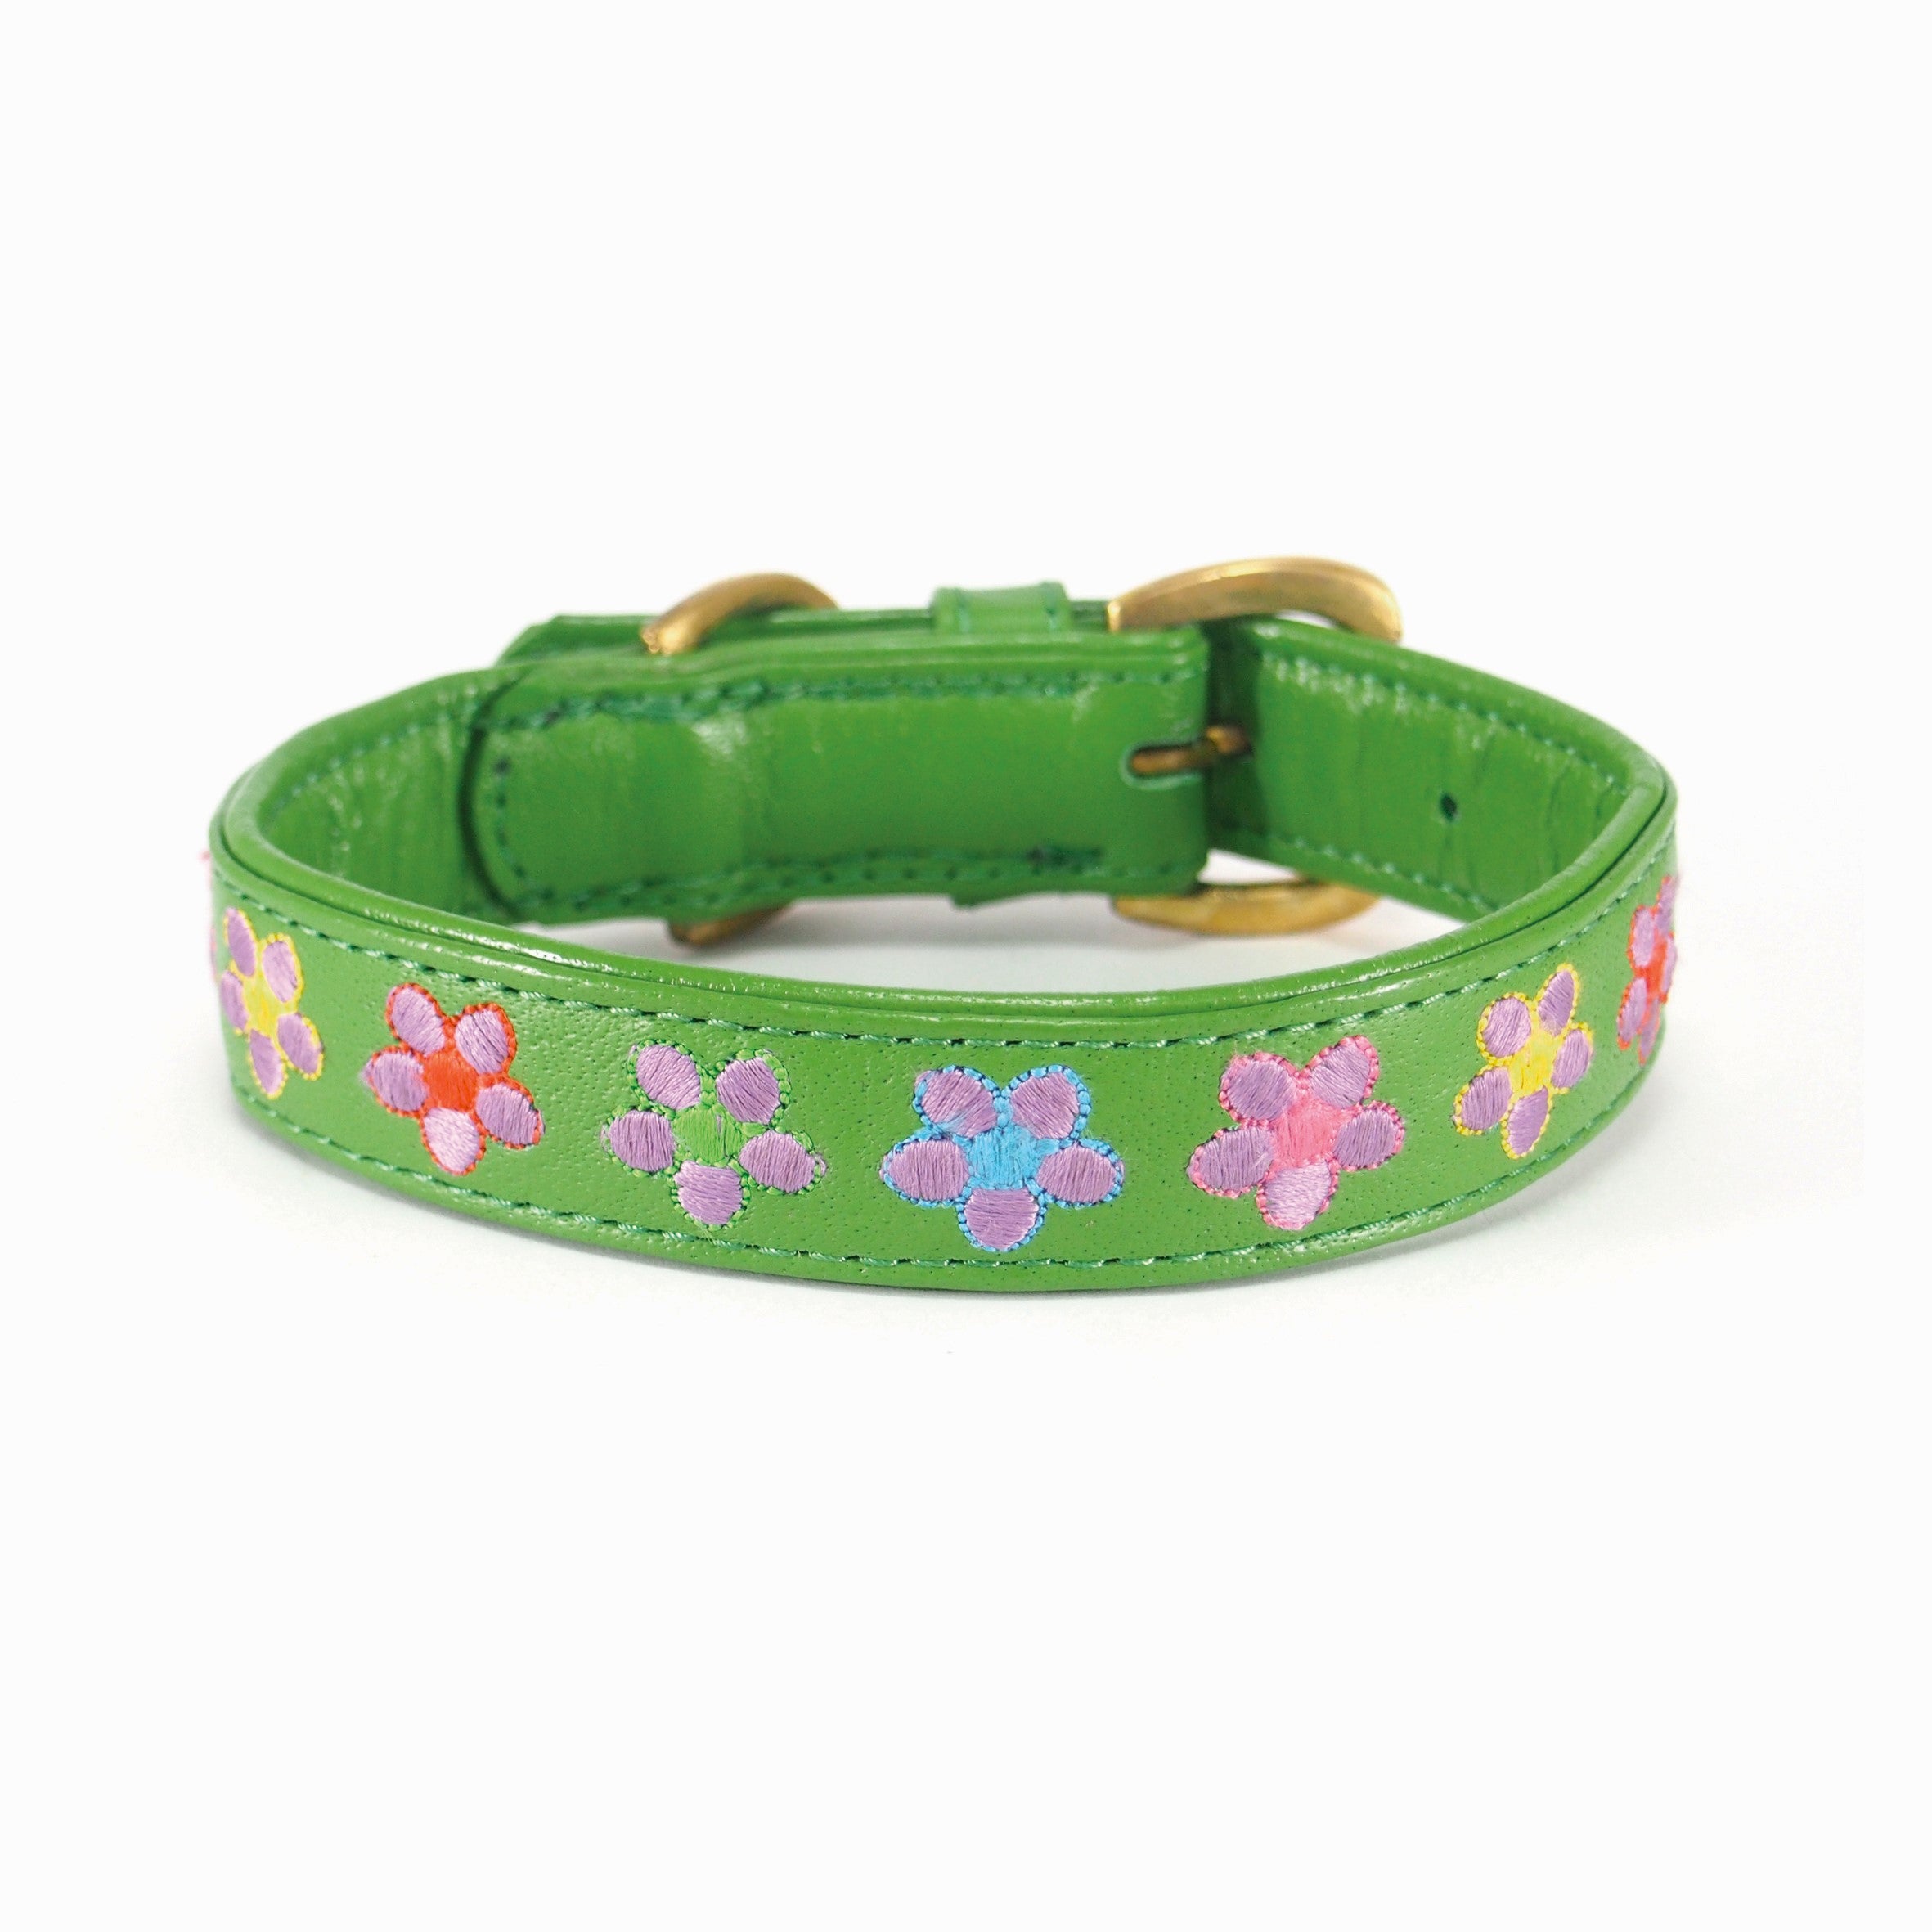 A Botanic Basil Collar from Georgie Paws, made of green buffalo leather and adorned with embroidered flower patterns, featuring a gold-tone buckle and loop, isolated on a white background.